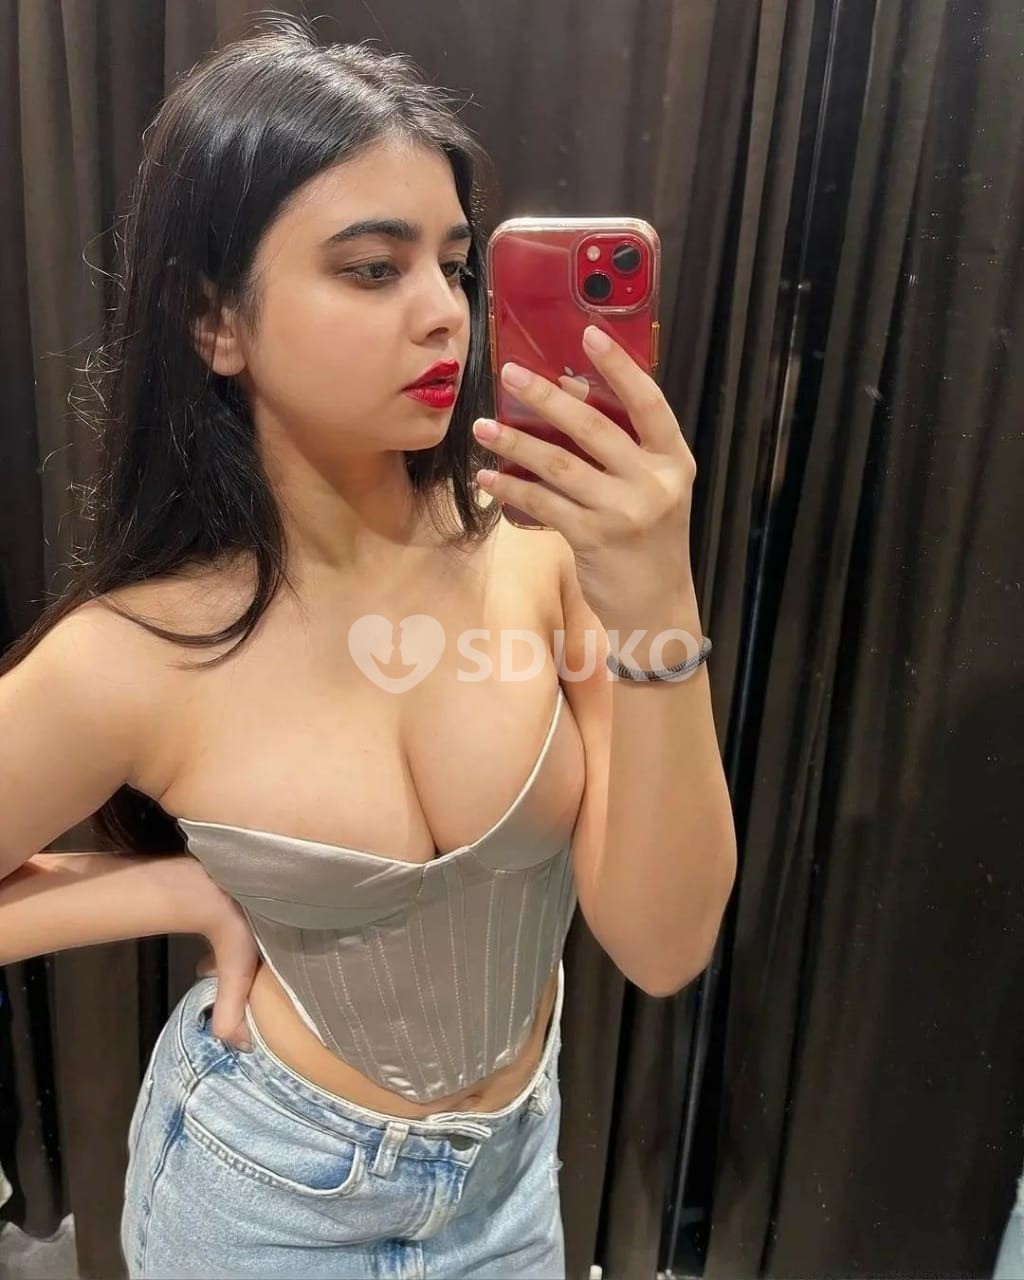 DWARKA VIP TODAY LOW PRICE ()ESCORT 🥰SERVICE 100% SAFE AND SECURE ANYTIME CALL ME 24 X 7 SERVICE AVAILABLE 100% SAFE